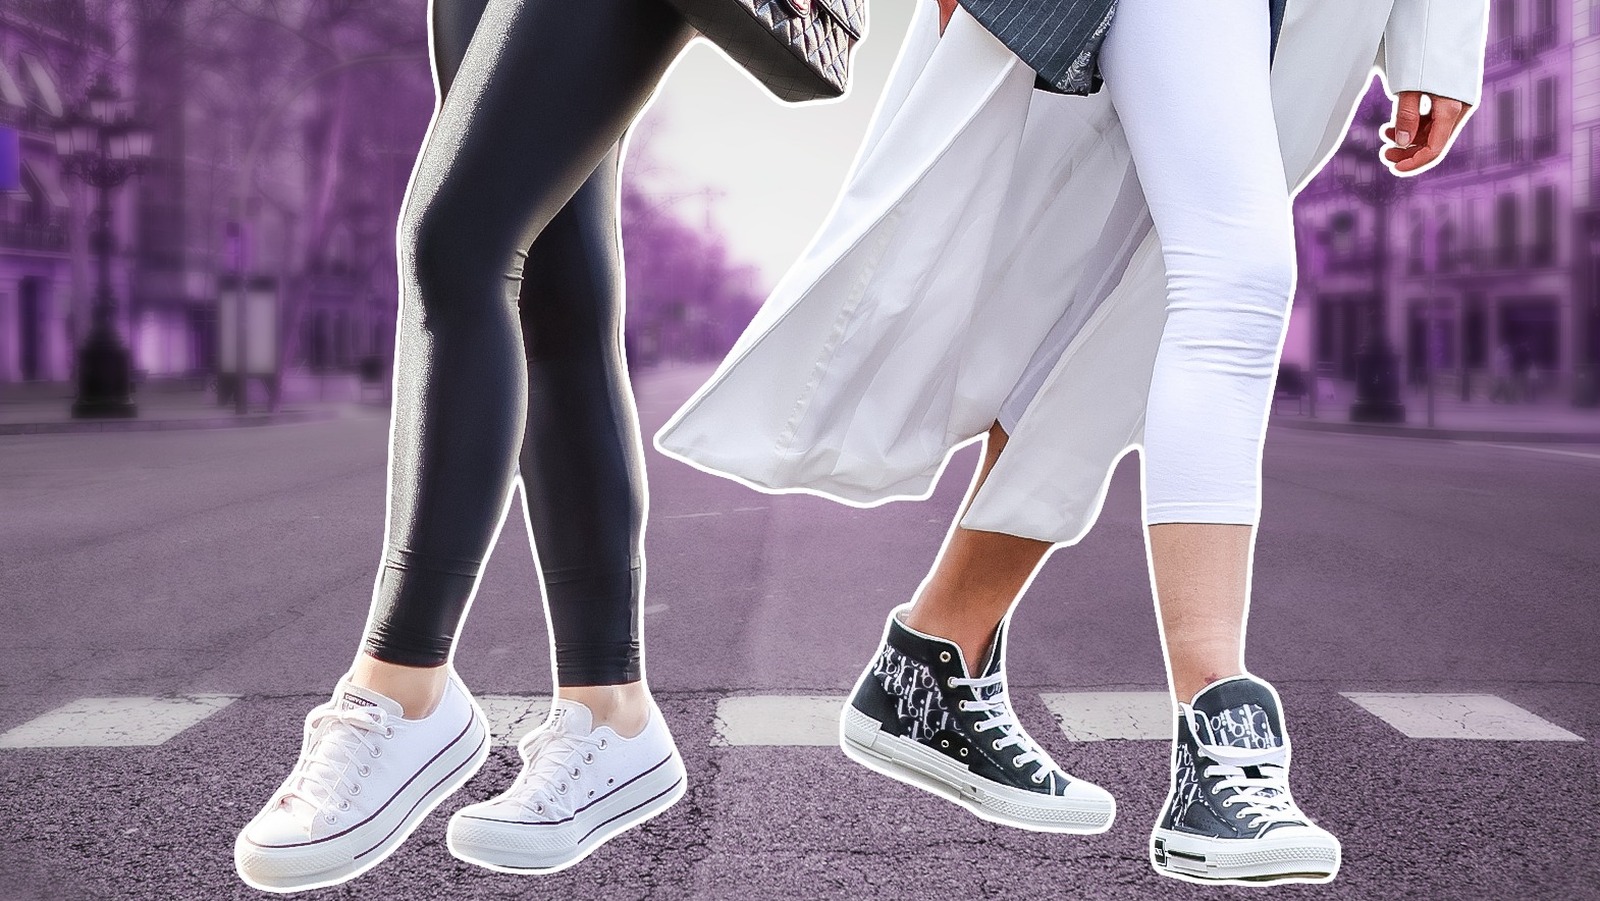 Wearing Canvas Sneakers With Leggings Is Outdated - Here's What To